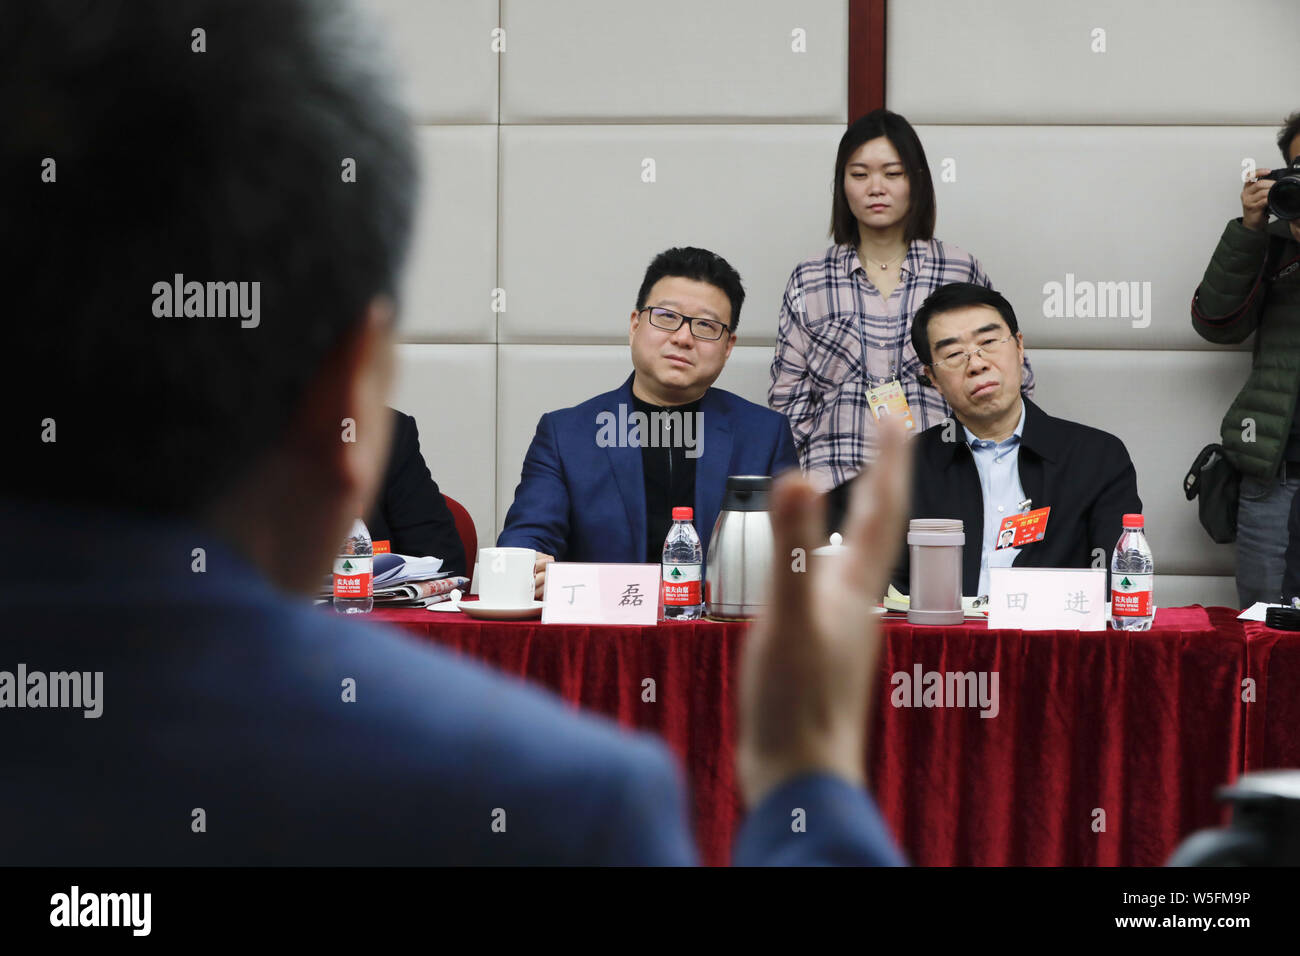 William Ding or Ding Lei, CEO of Netease (163.com), and Charles Zhang Chaoyang, Chairman and CEO of Chinese Internet portal Sohu.com, attends a panel Stock Photo